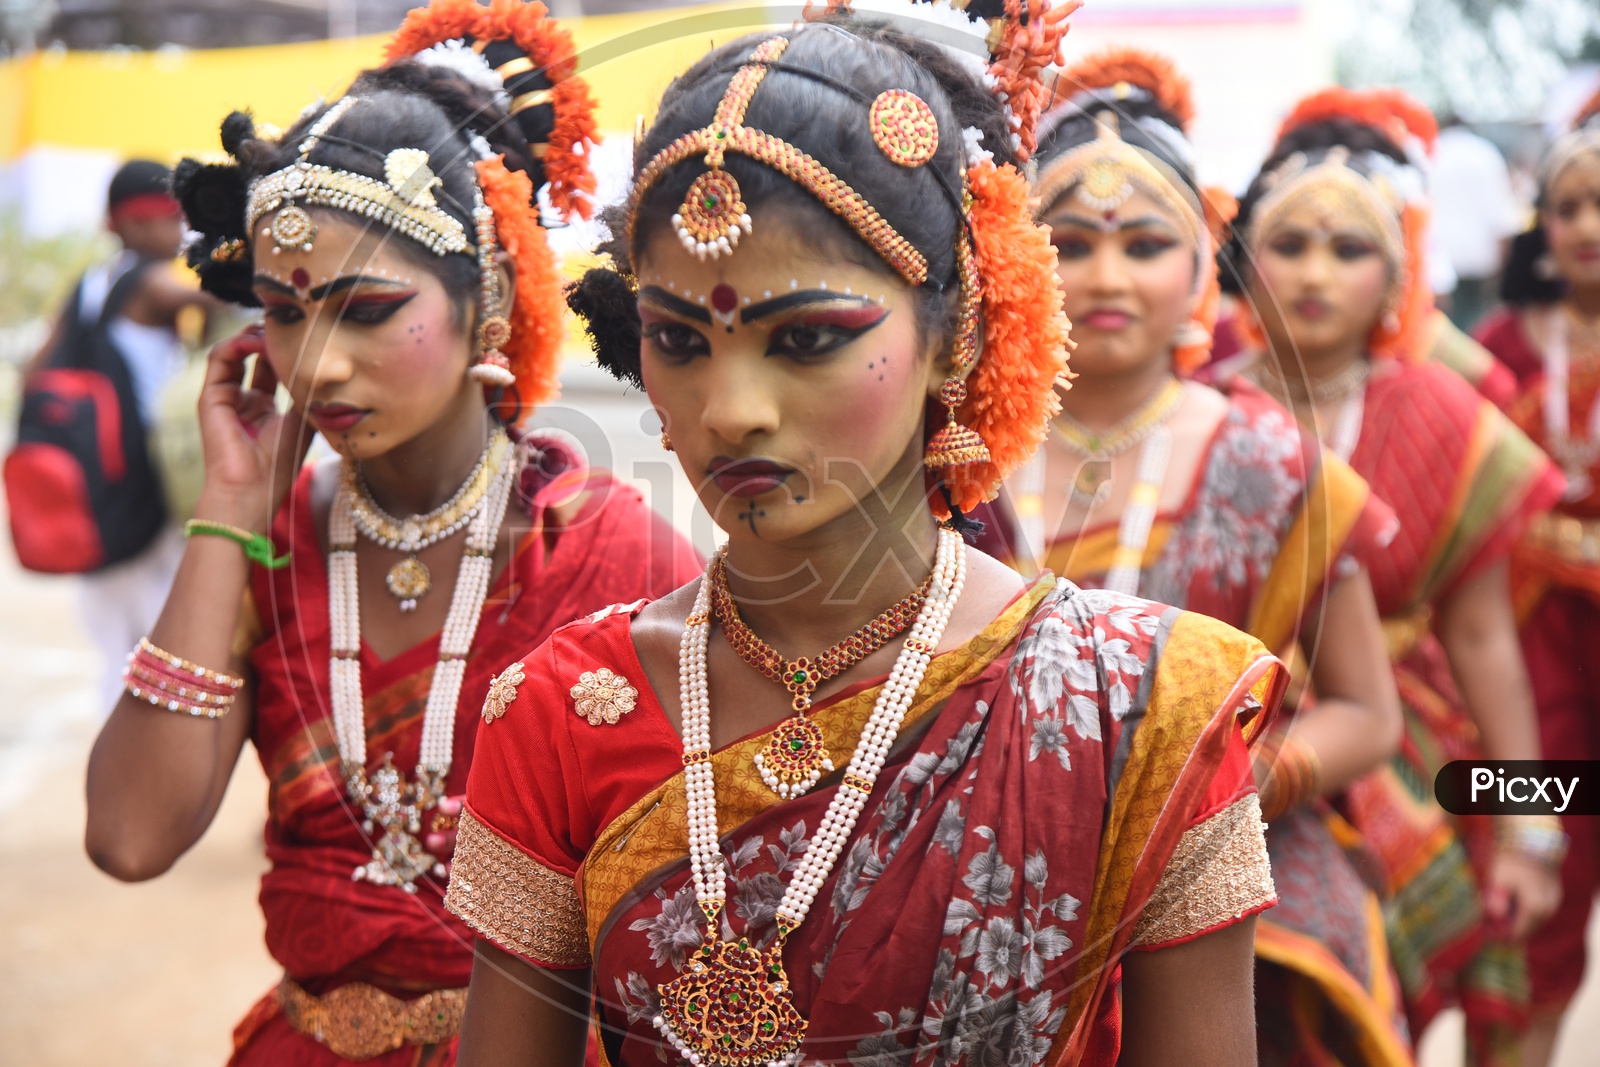 Students In Traditional Dancer Attire